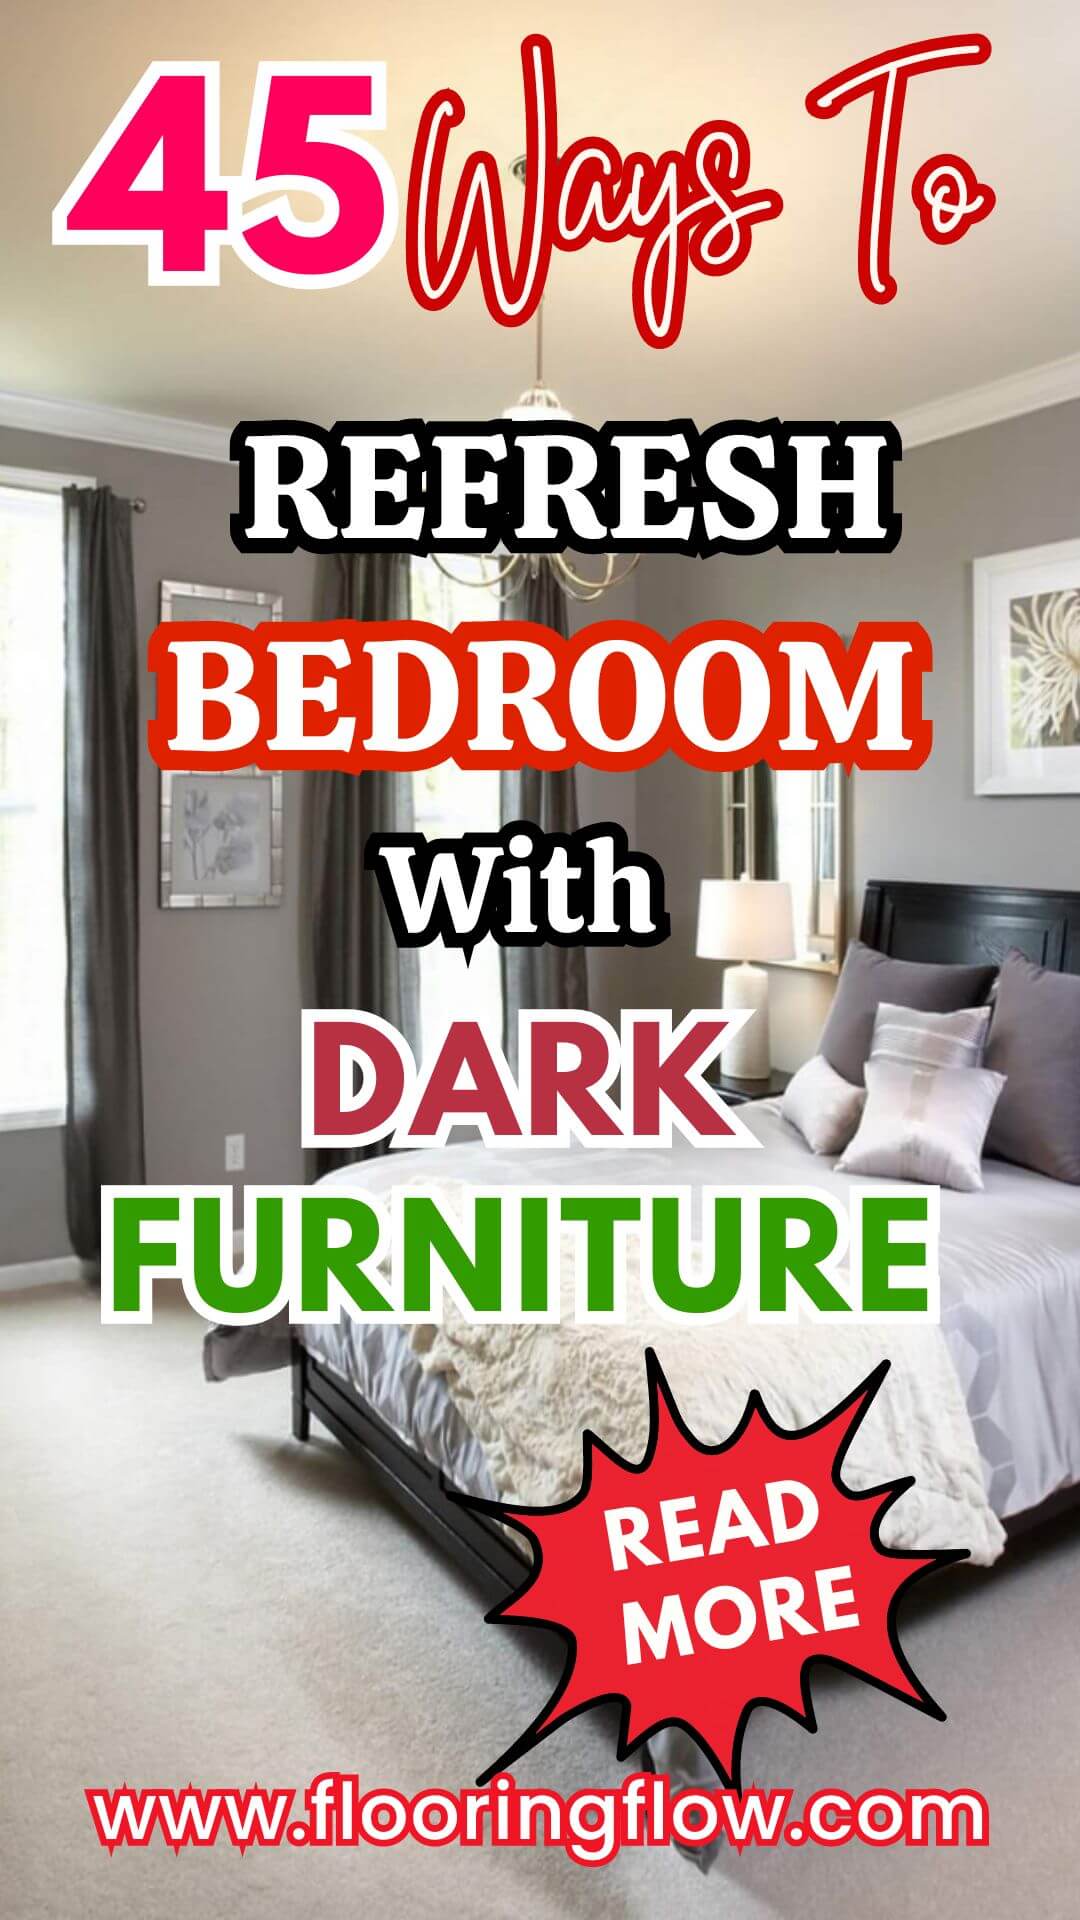 Ways to Refresh Your Home Bedroom with Dark Furniture